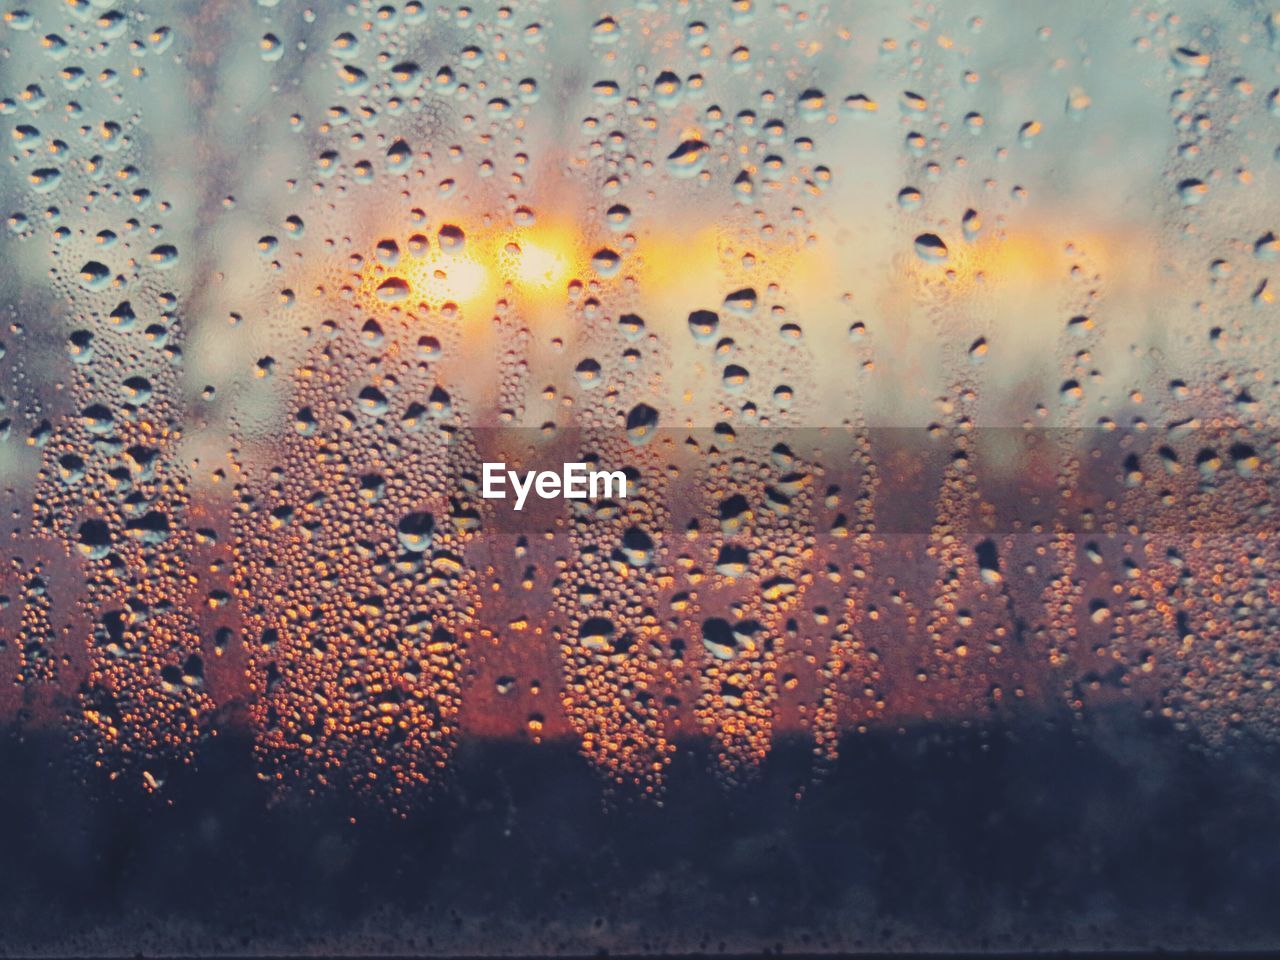 CLOSE-UP OF WET WINDOW AGAINST SUNSET SKY